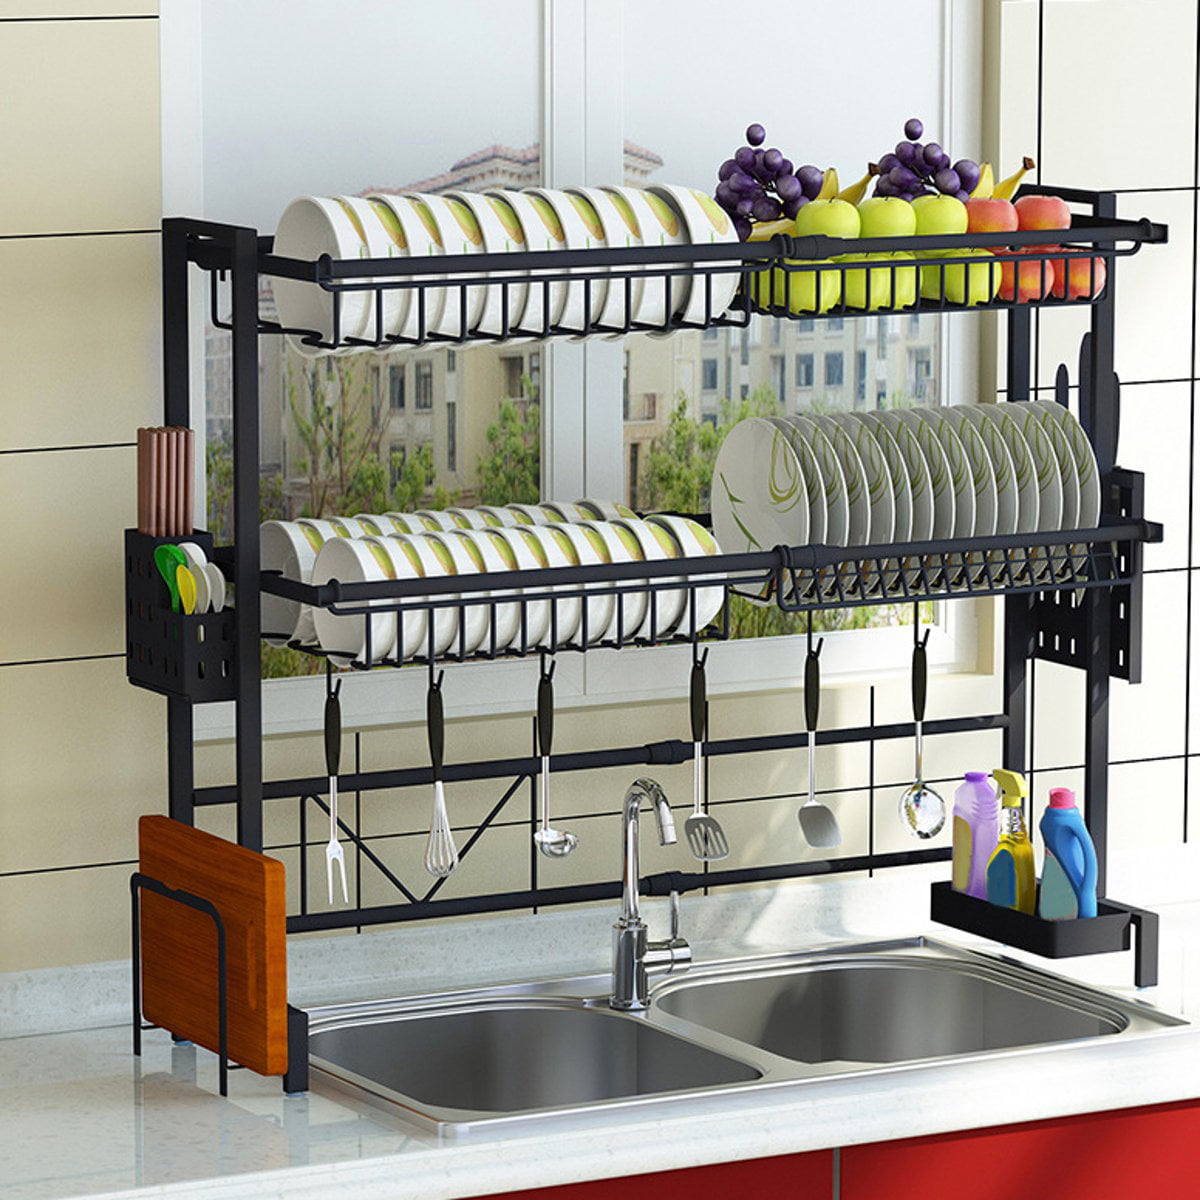 Over Sink Dish Drying Rack Stainless Steel Stable Adjustable Dish Drainer Shelf Rust Free